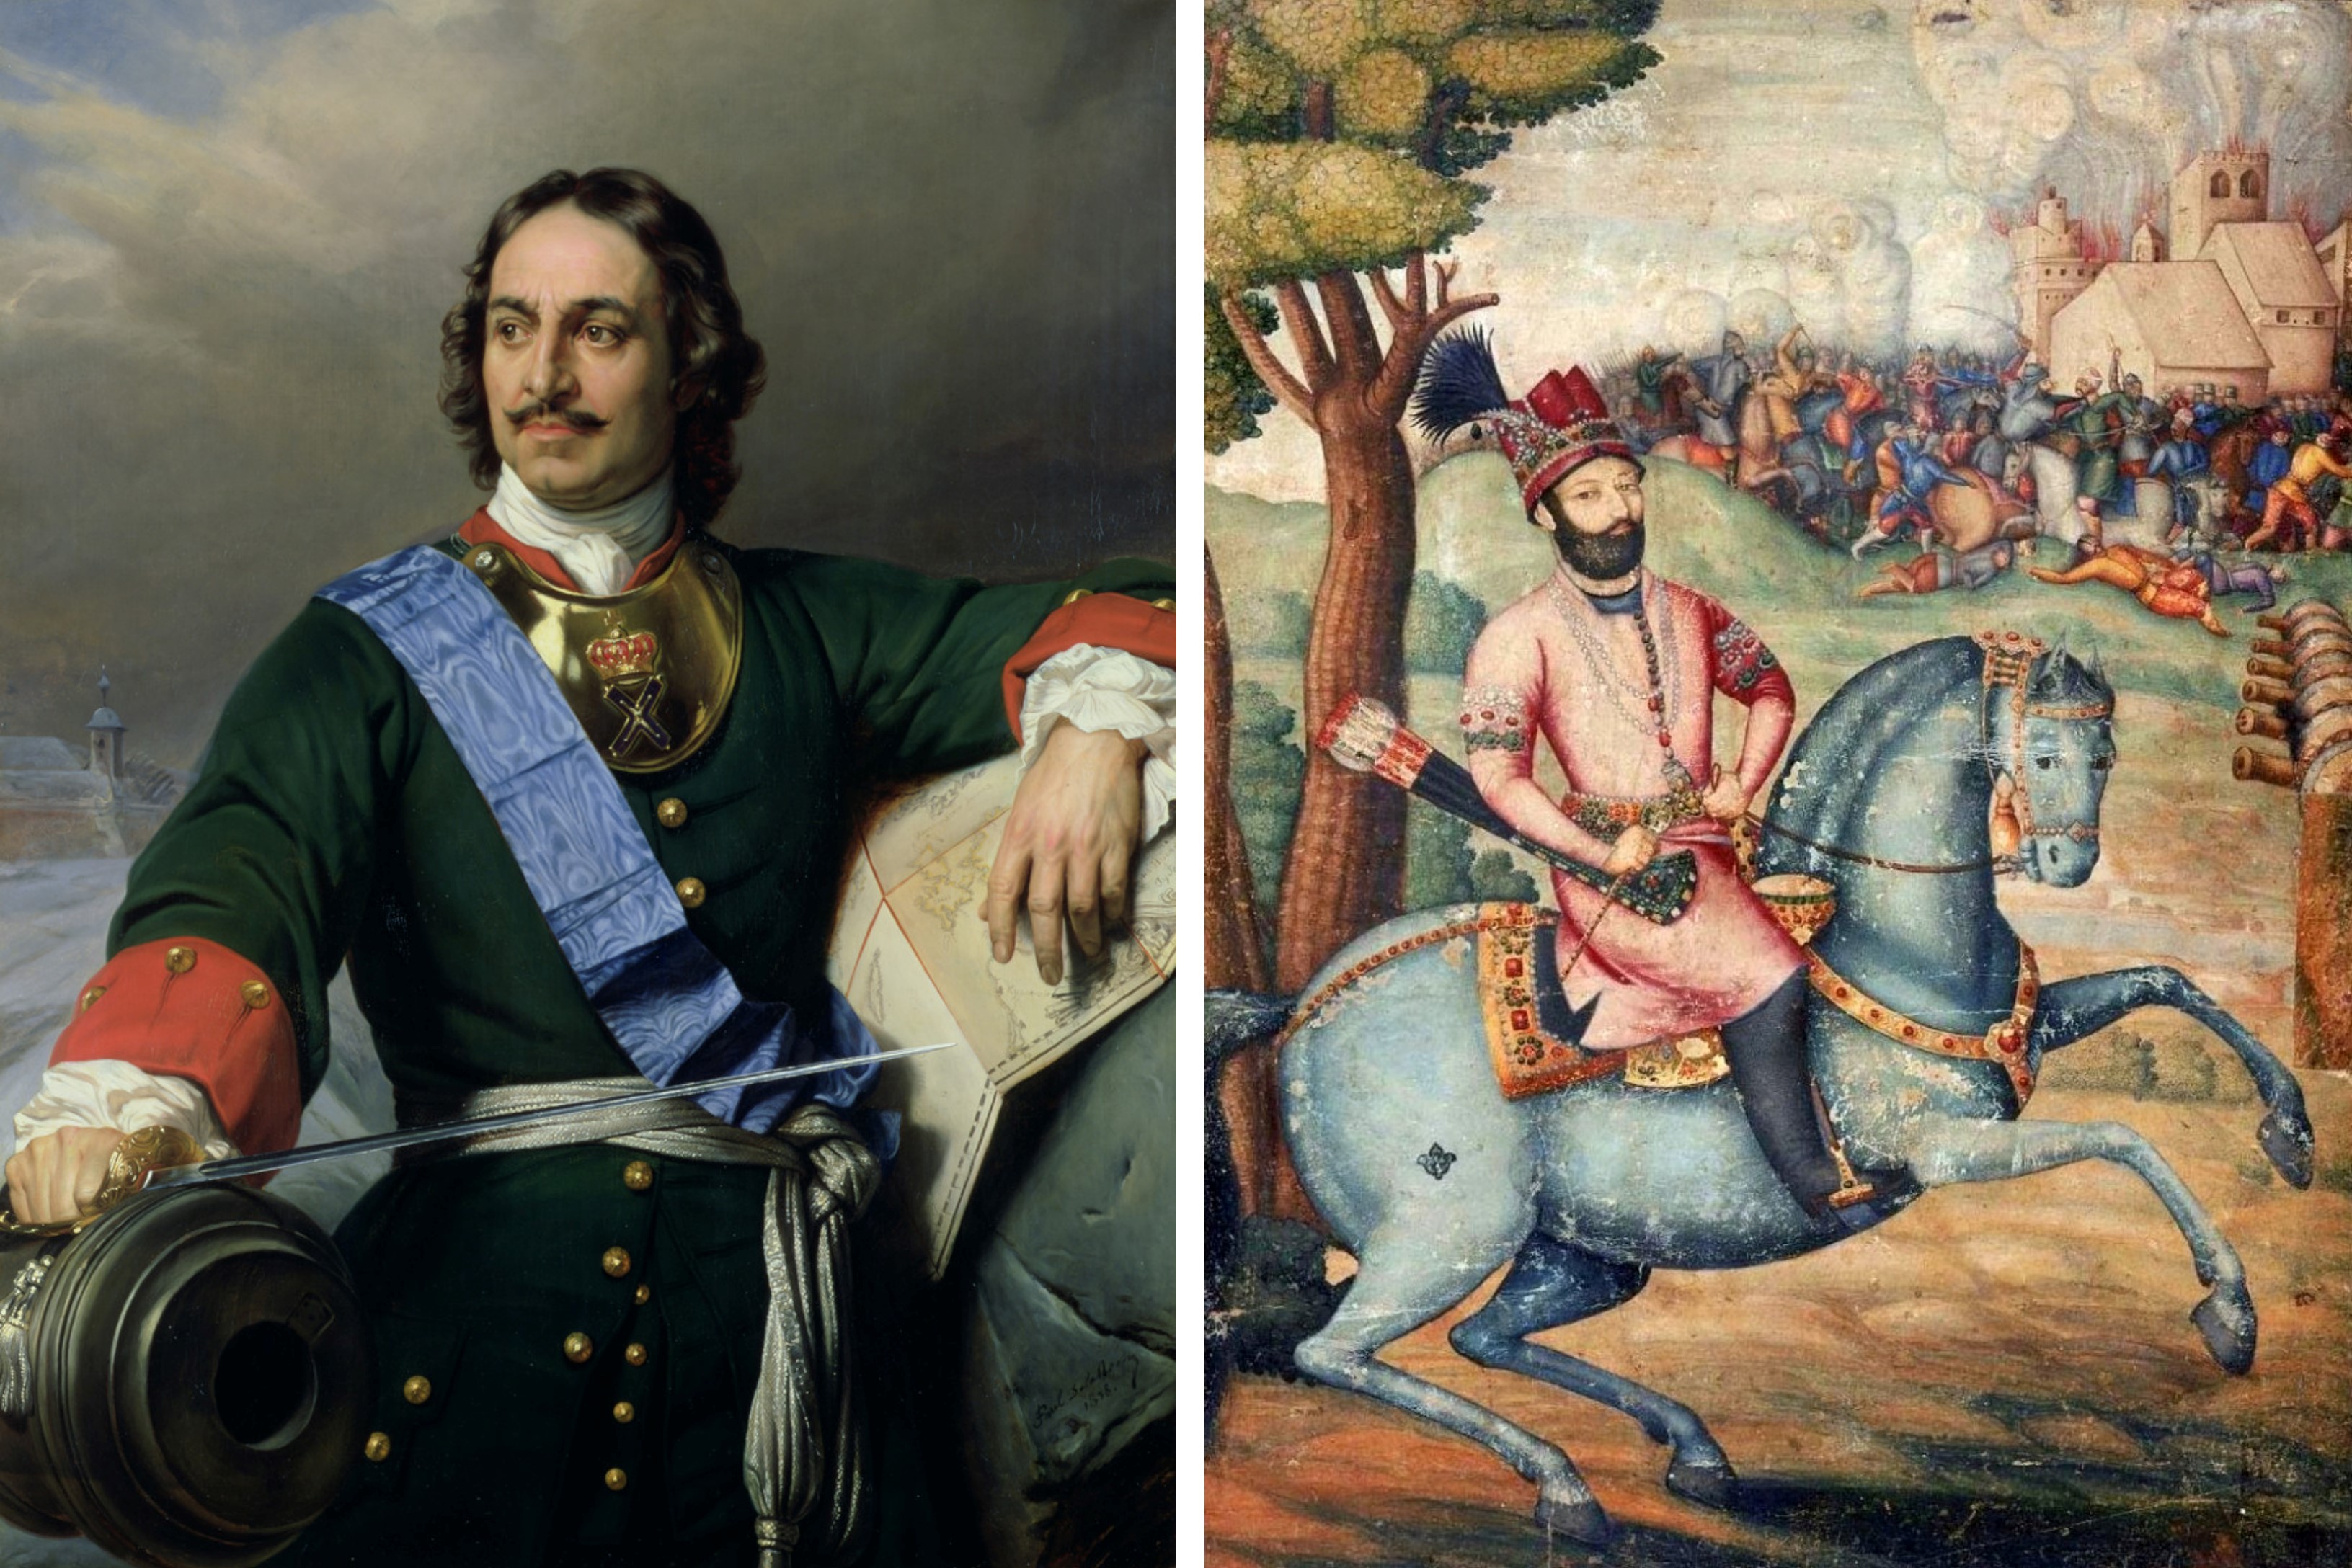 On the left, Russian Tsar Peter the Great. On the right, Persian ruler Nader Shah.